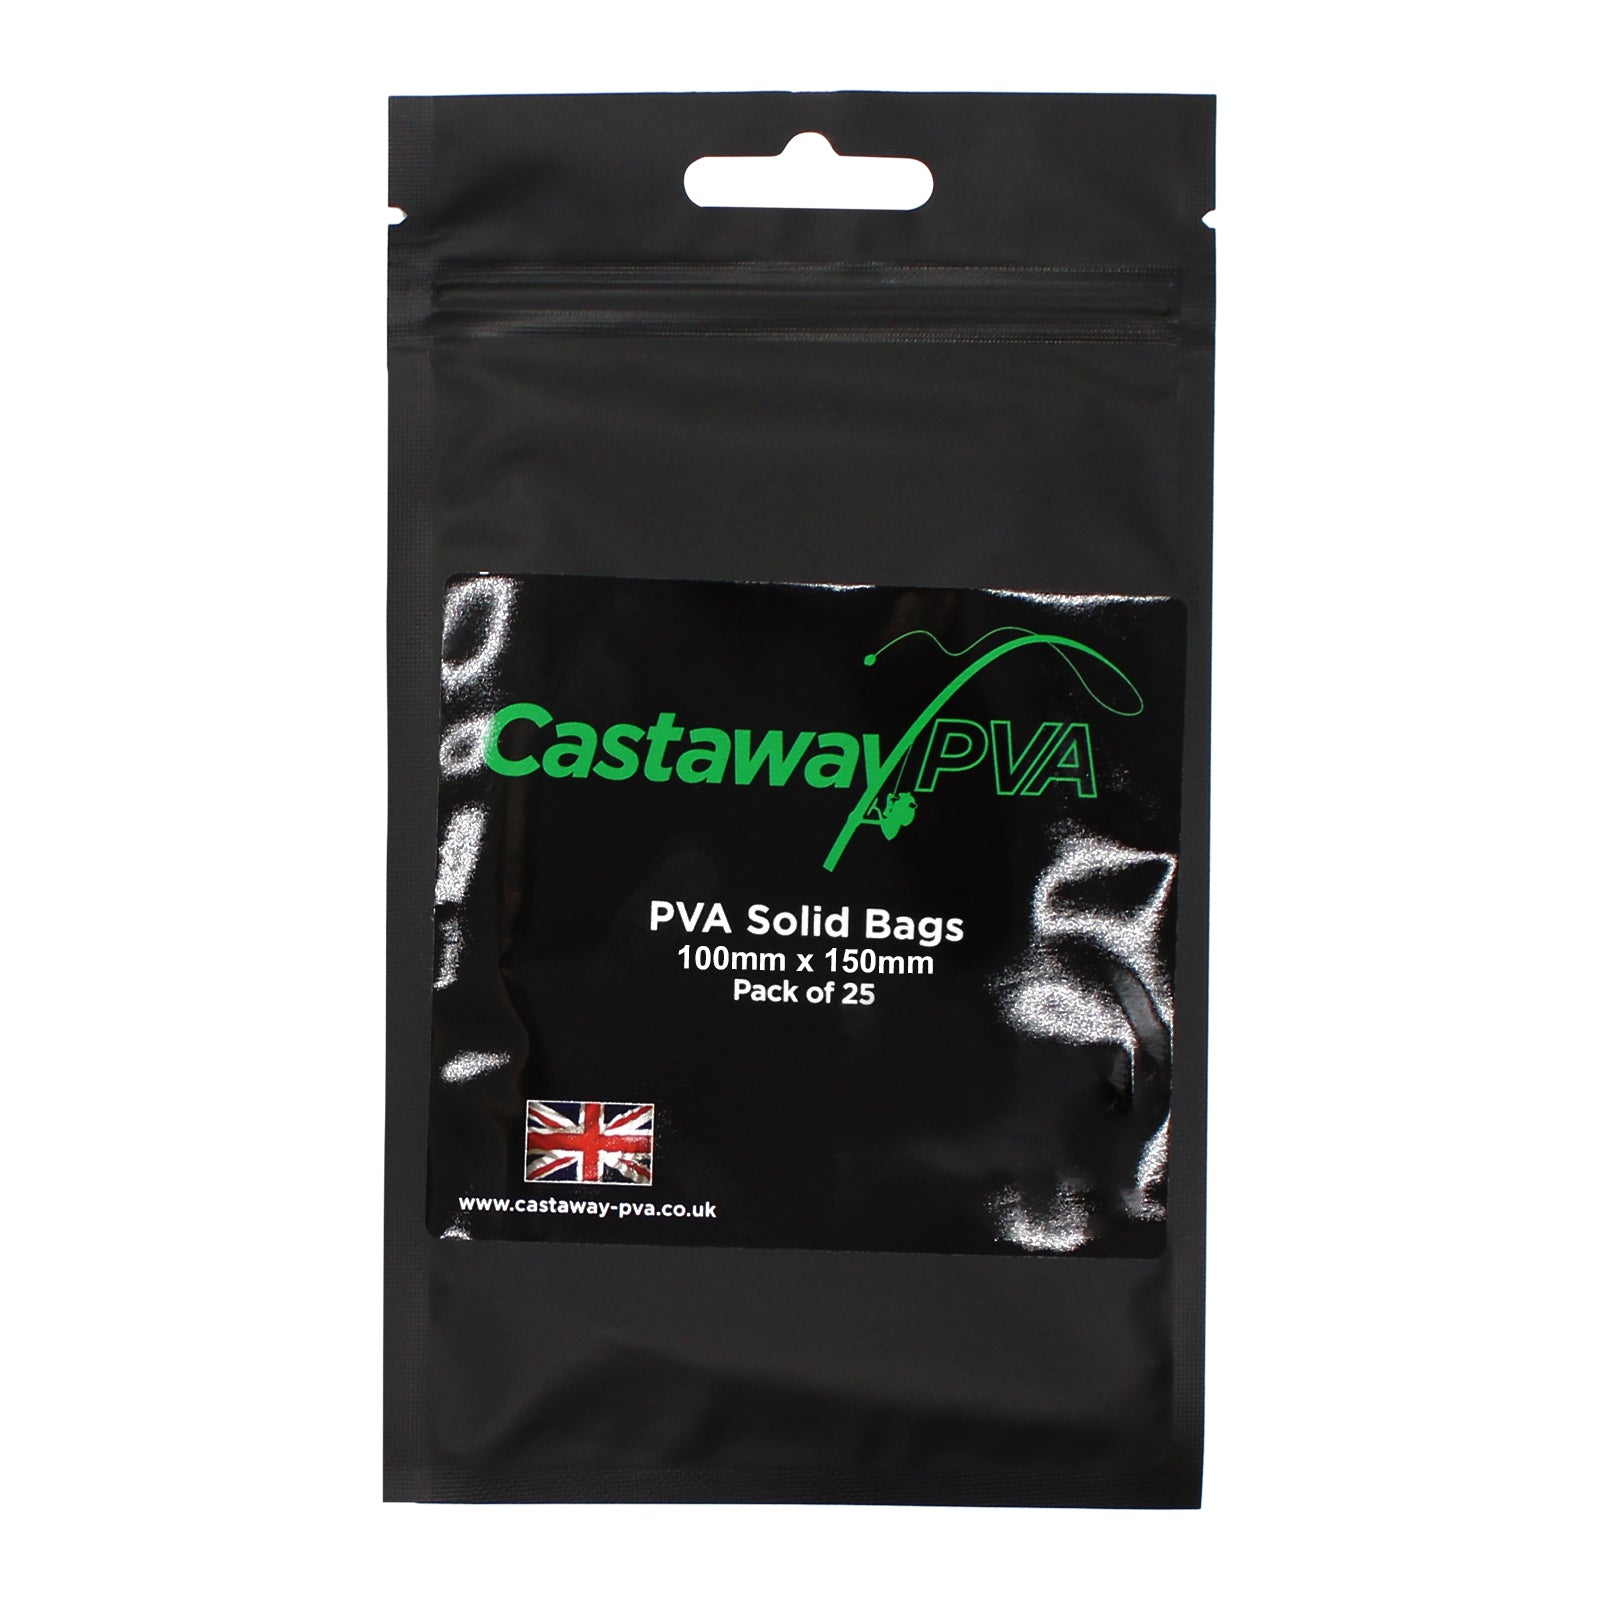 Castaway PVA Solid Bags 100mm x 150mm Pack of 25